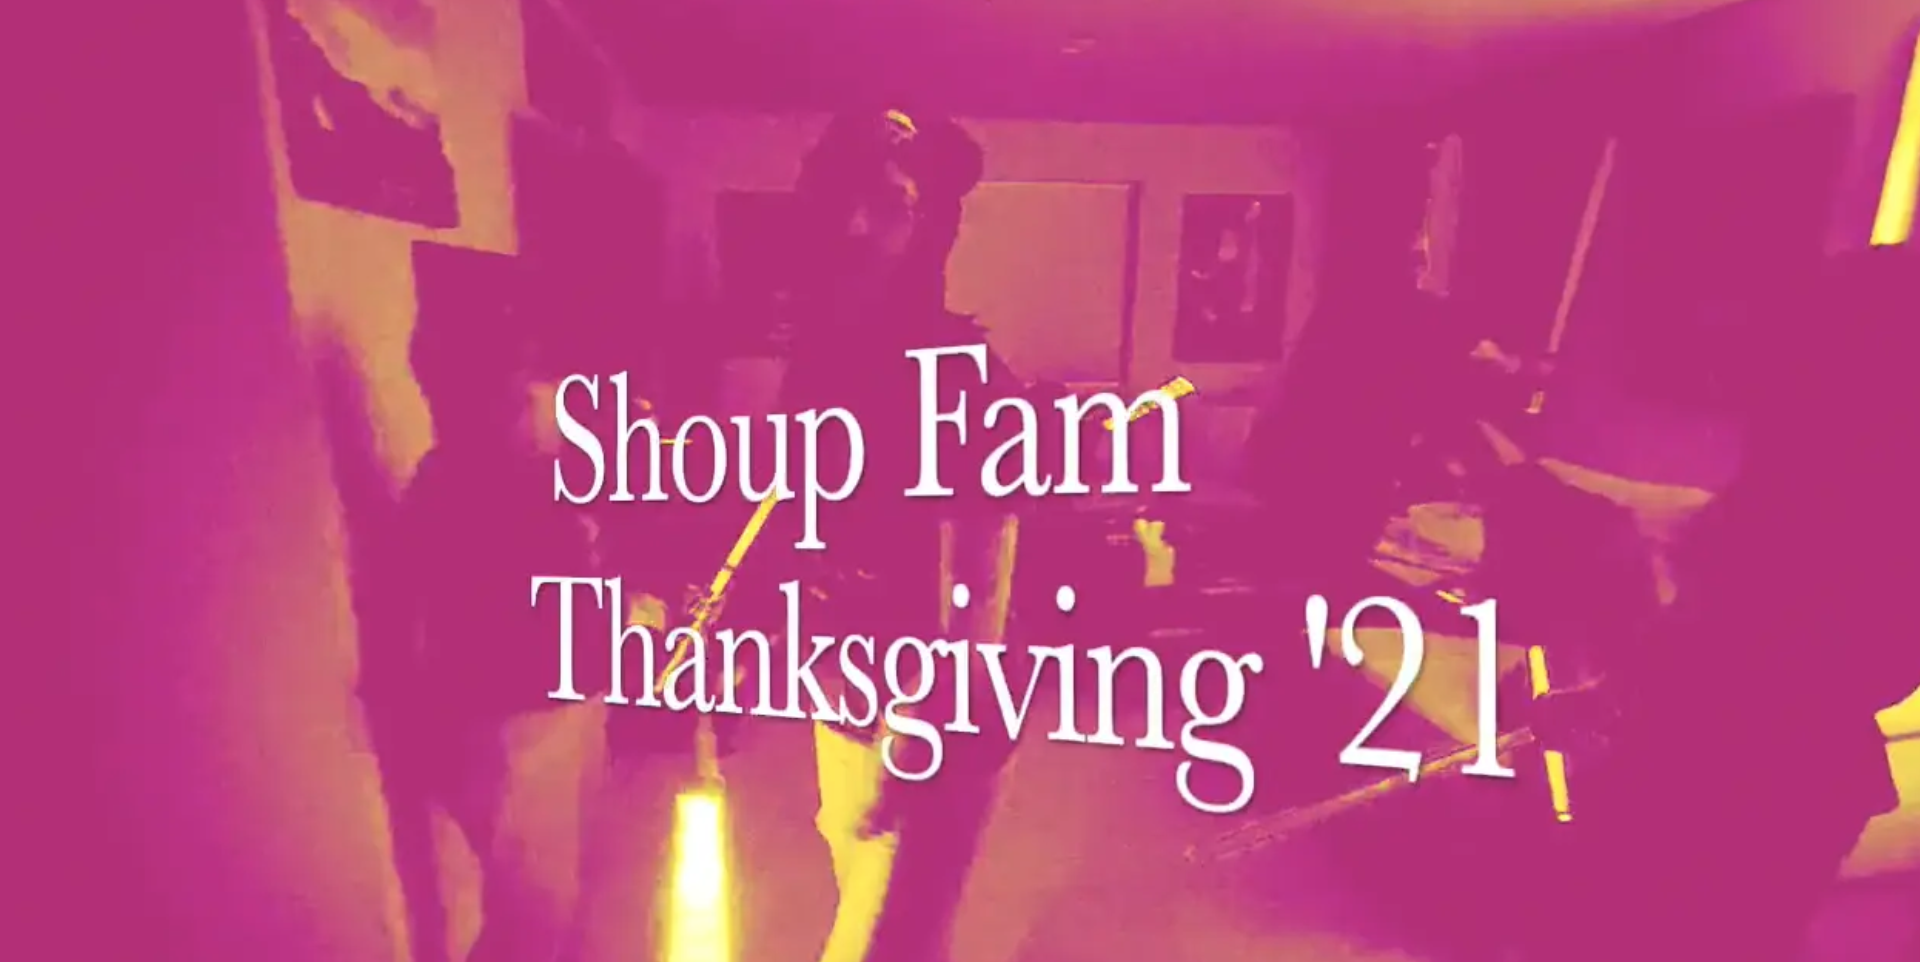 Shoup Family Thanksgiving ’21